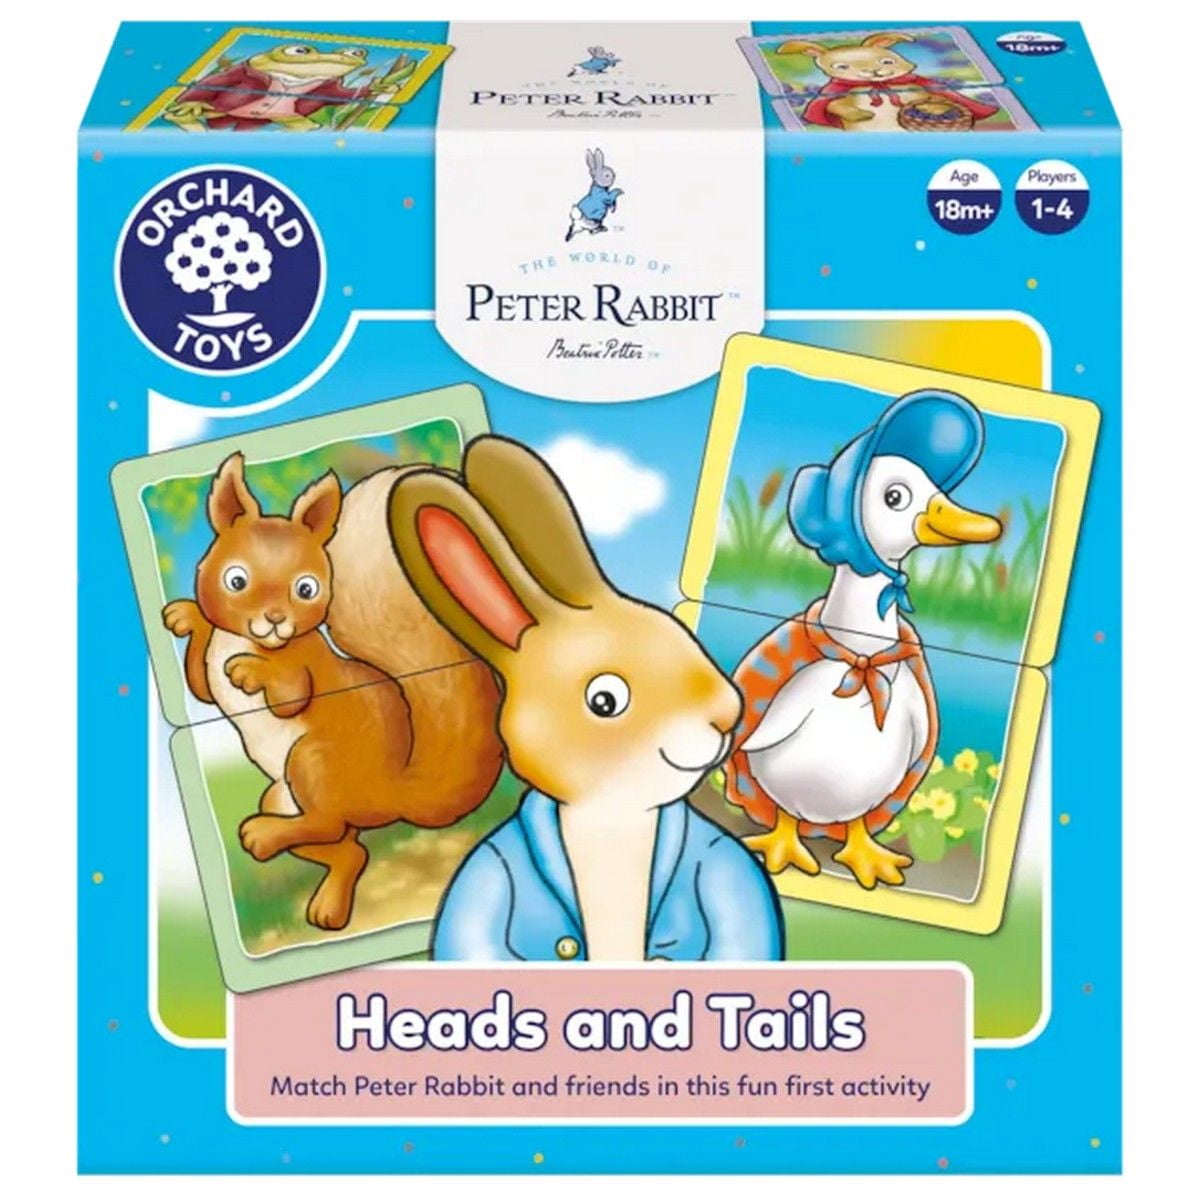 Peter Rabbit: Heads and Tails